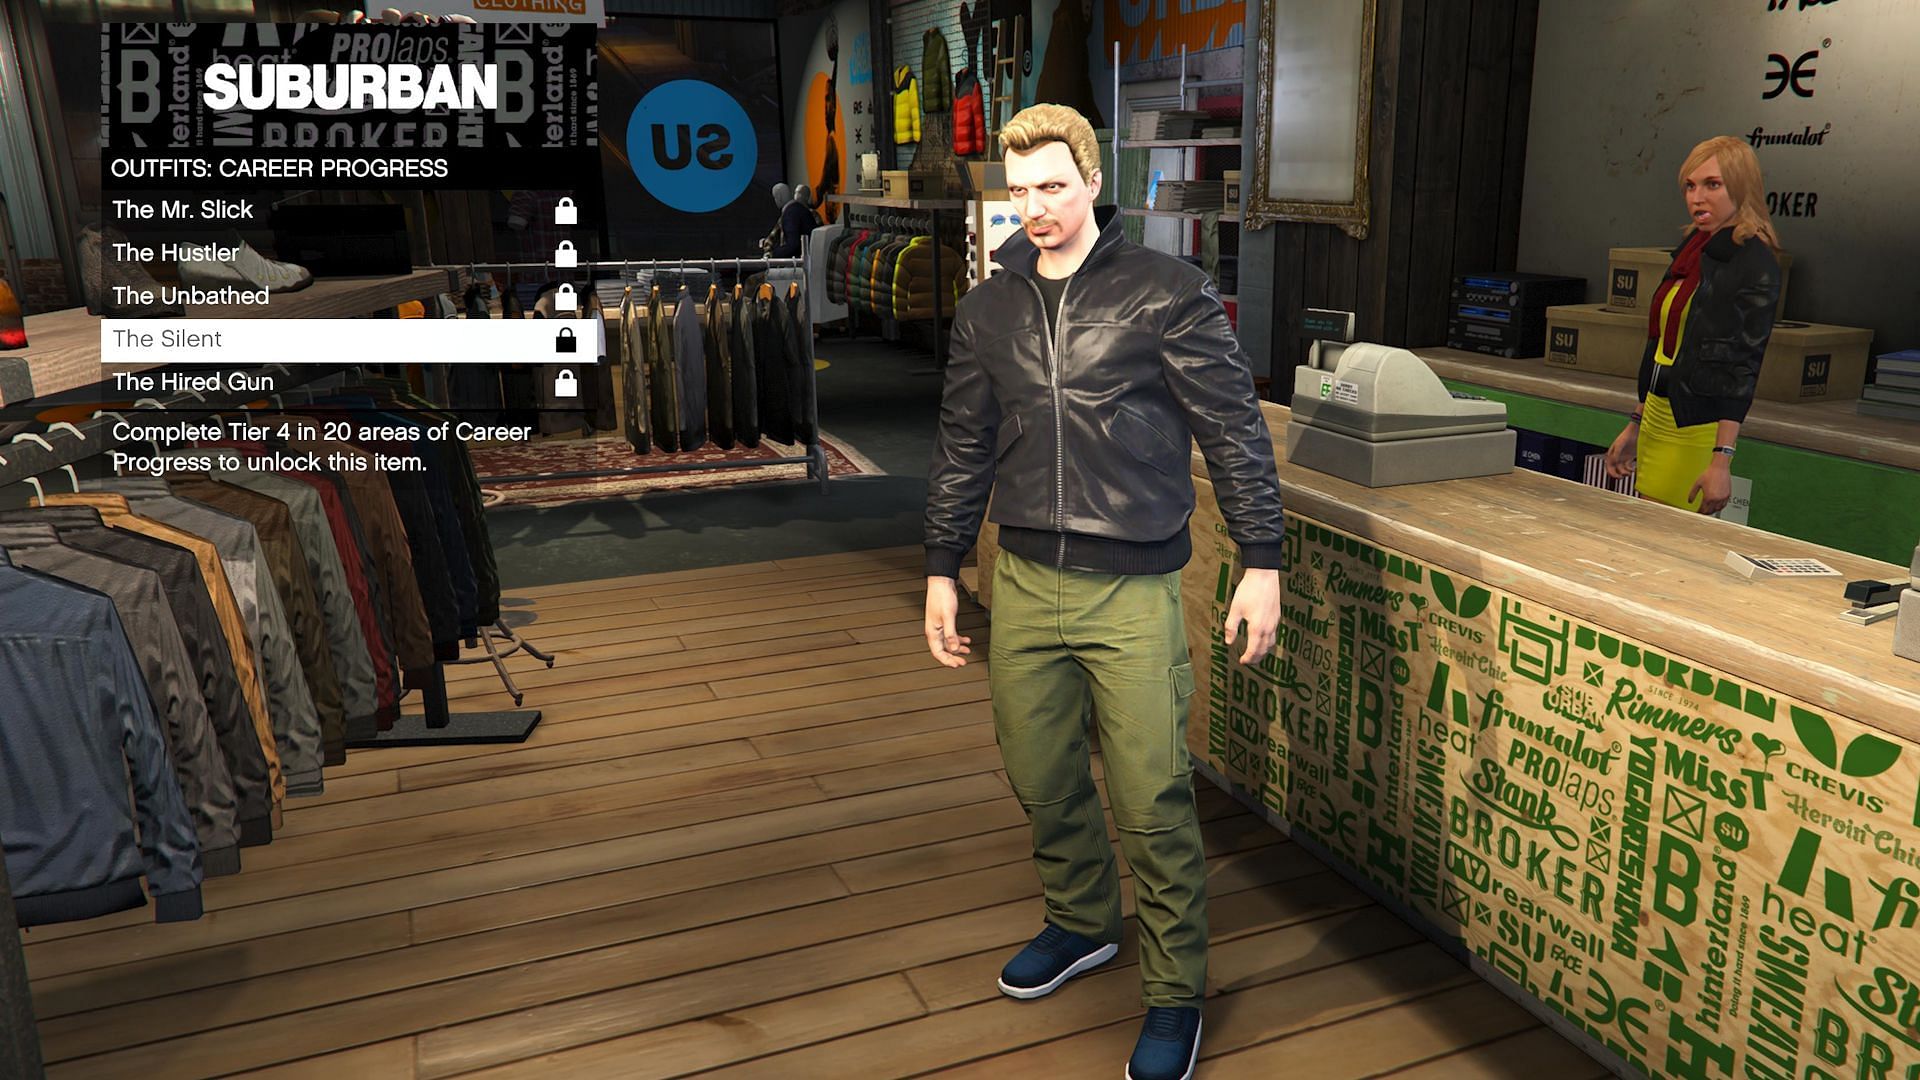 This attire is called The Silent in GTA Online (Image via Rockstar Games)